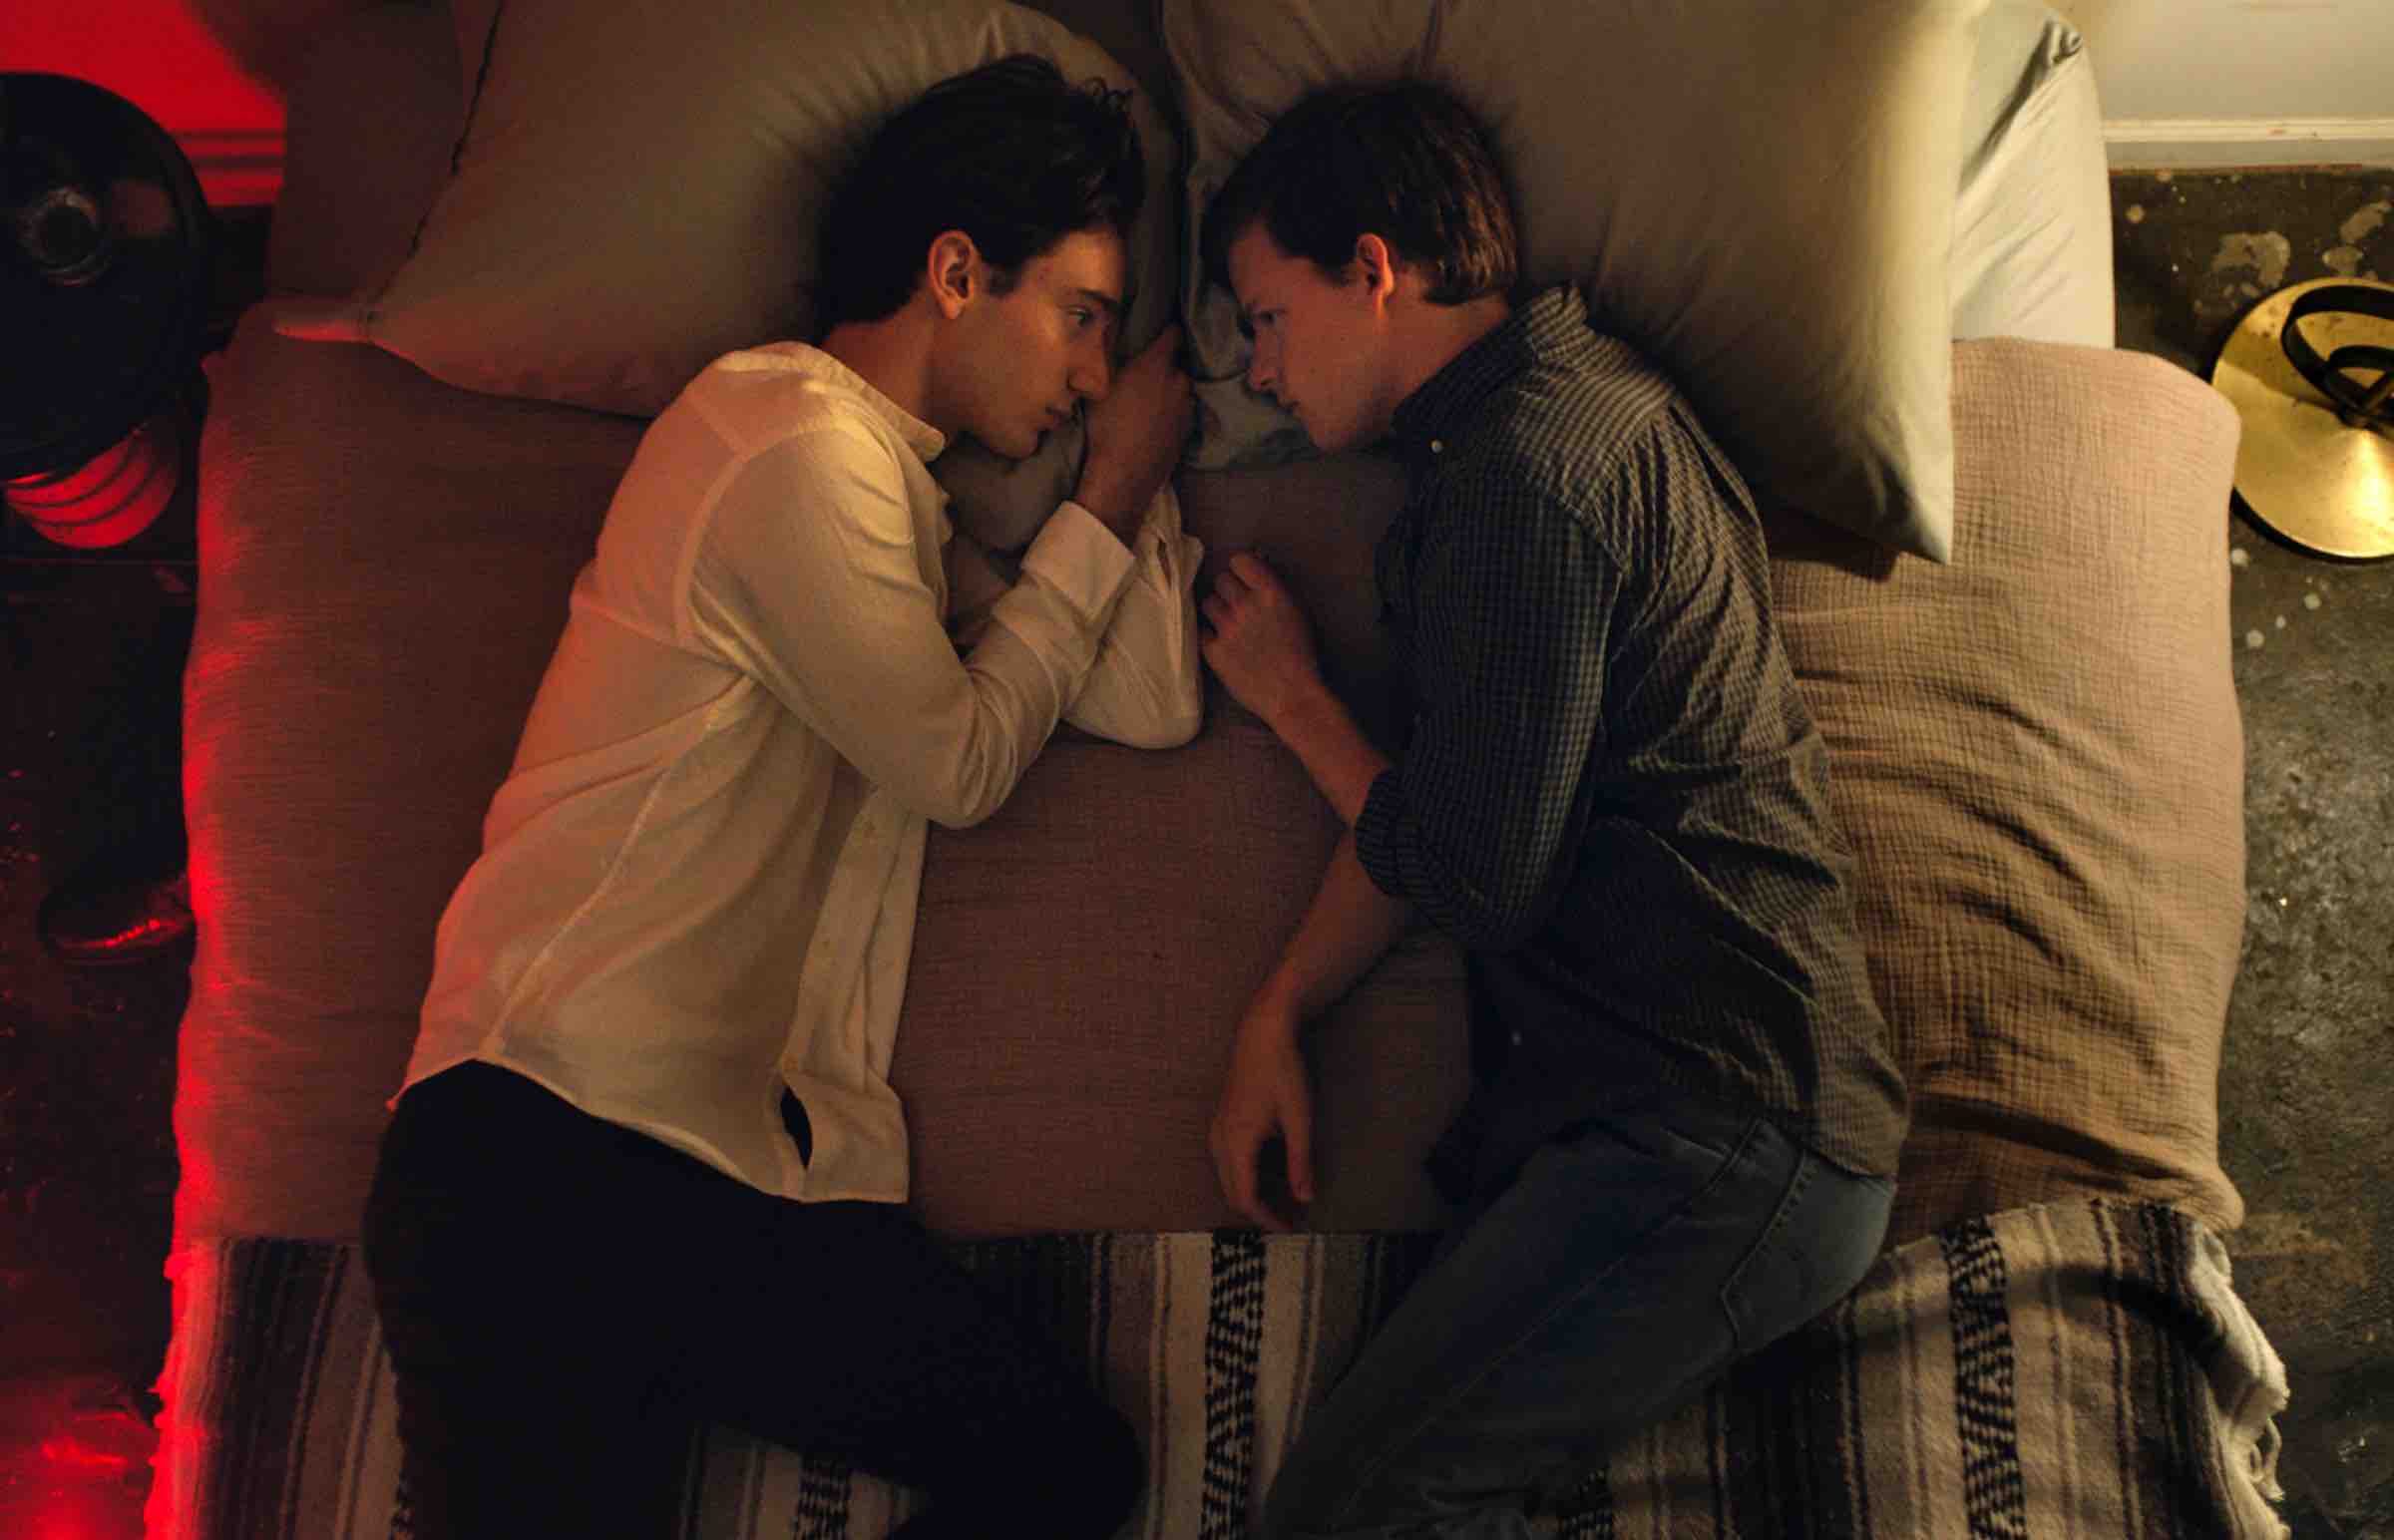 With the start of the decade, it’s time to find out which LGBTQ+ films will be worth checking out for the year. Here's the best gay films coming in 2020.